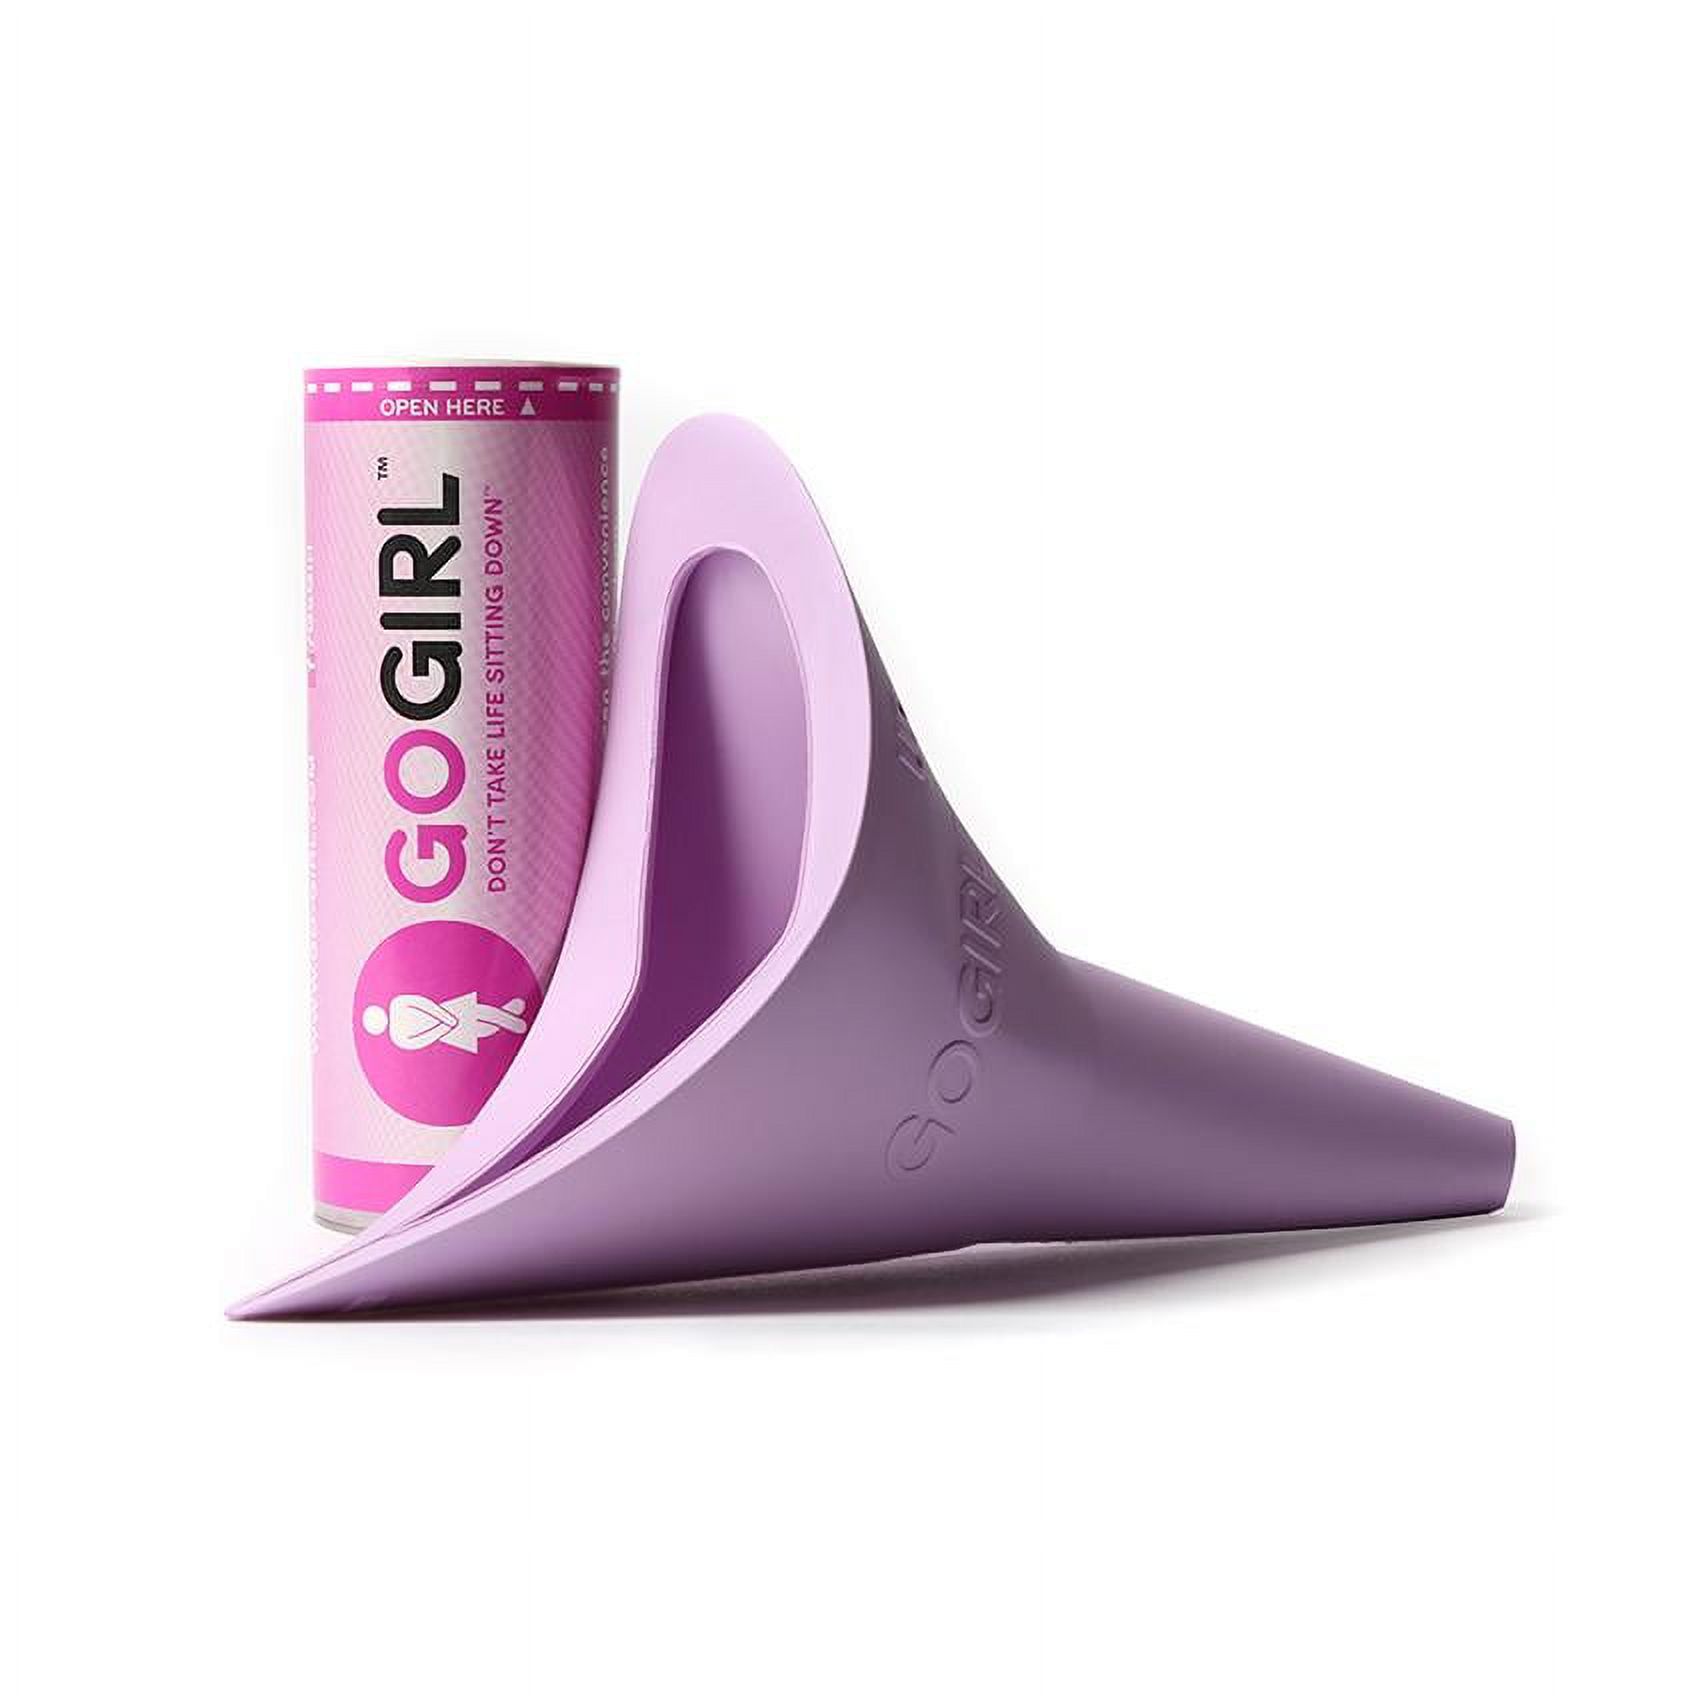 GoGirl Female Urination Device (FUD), Pink, Silicone, Resuable, and Travel Size funnel, 4.35 x 1.44 x 1.44inches - image 1 of 6